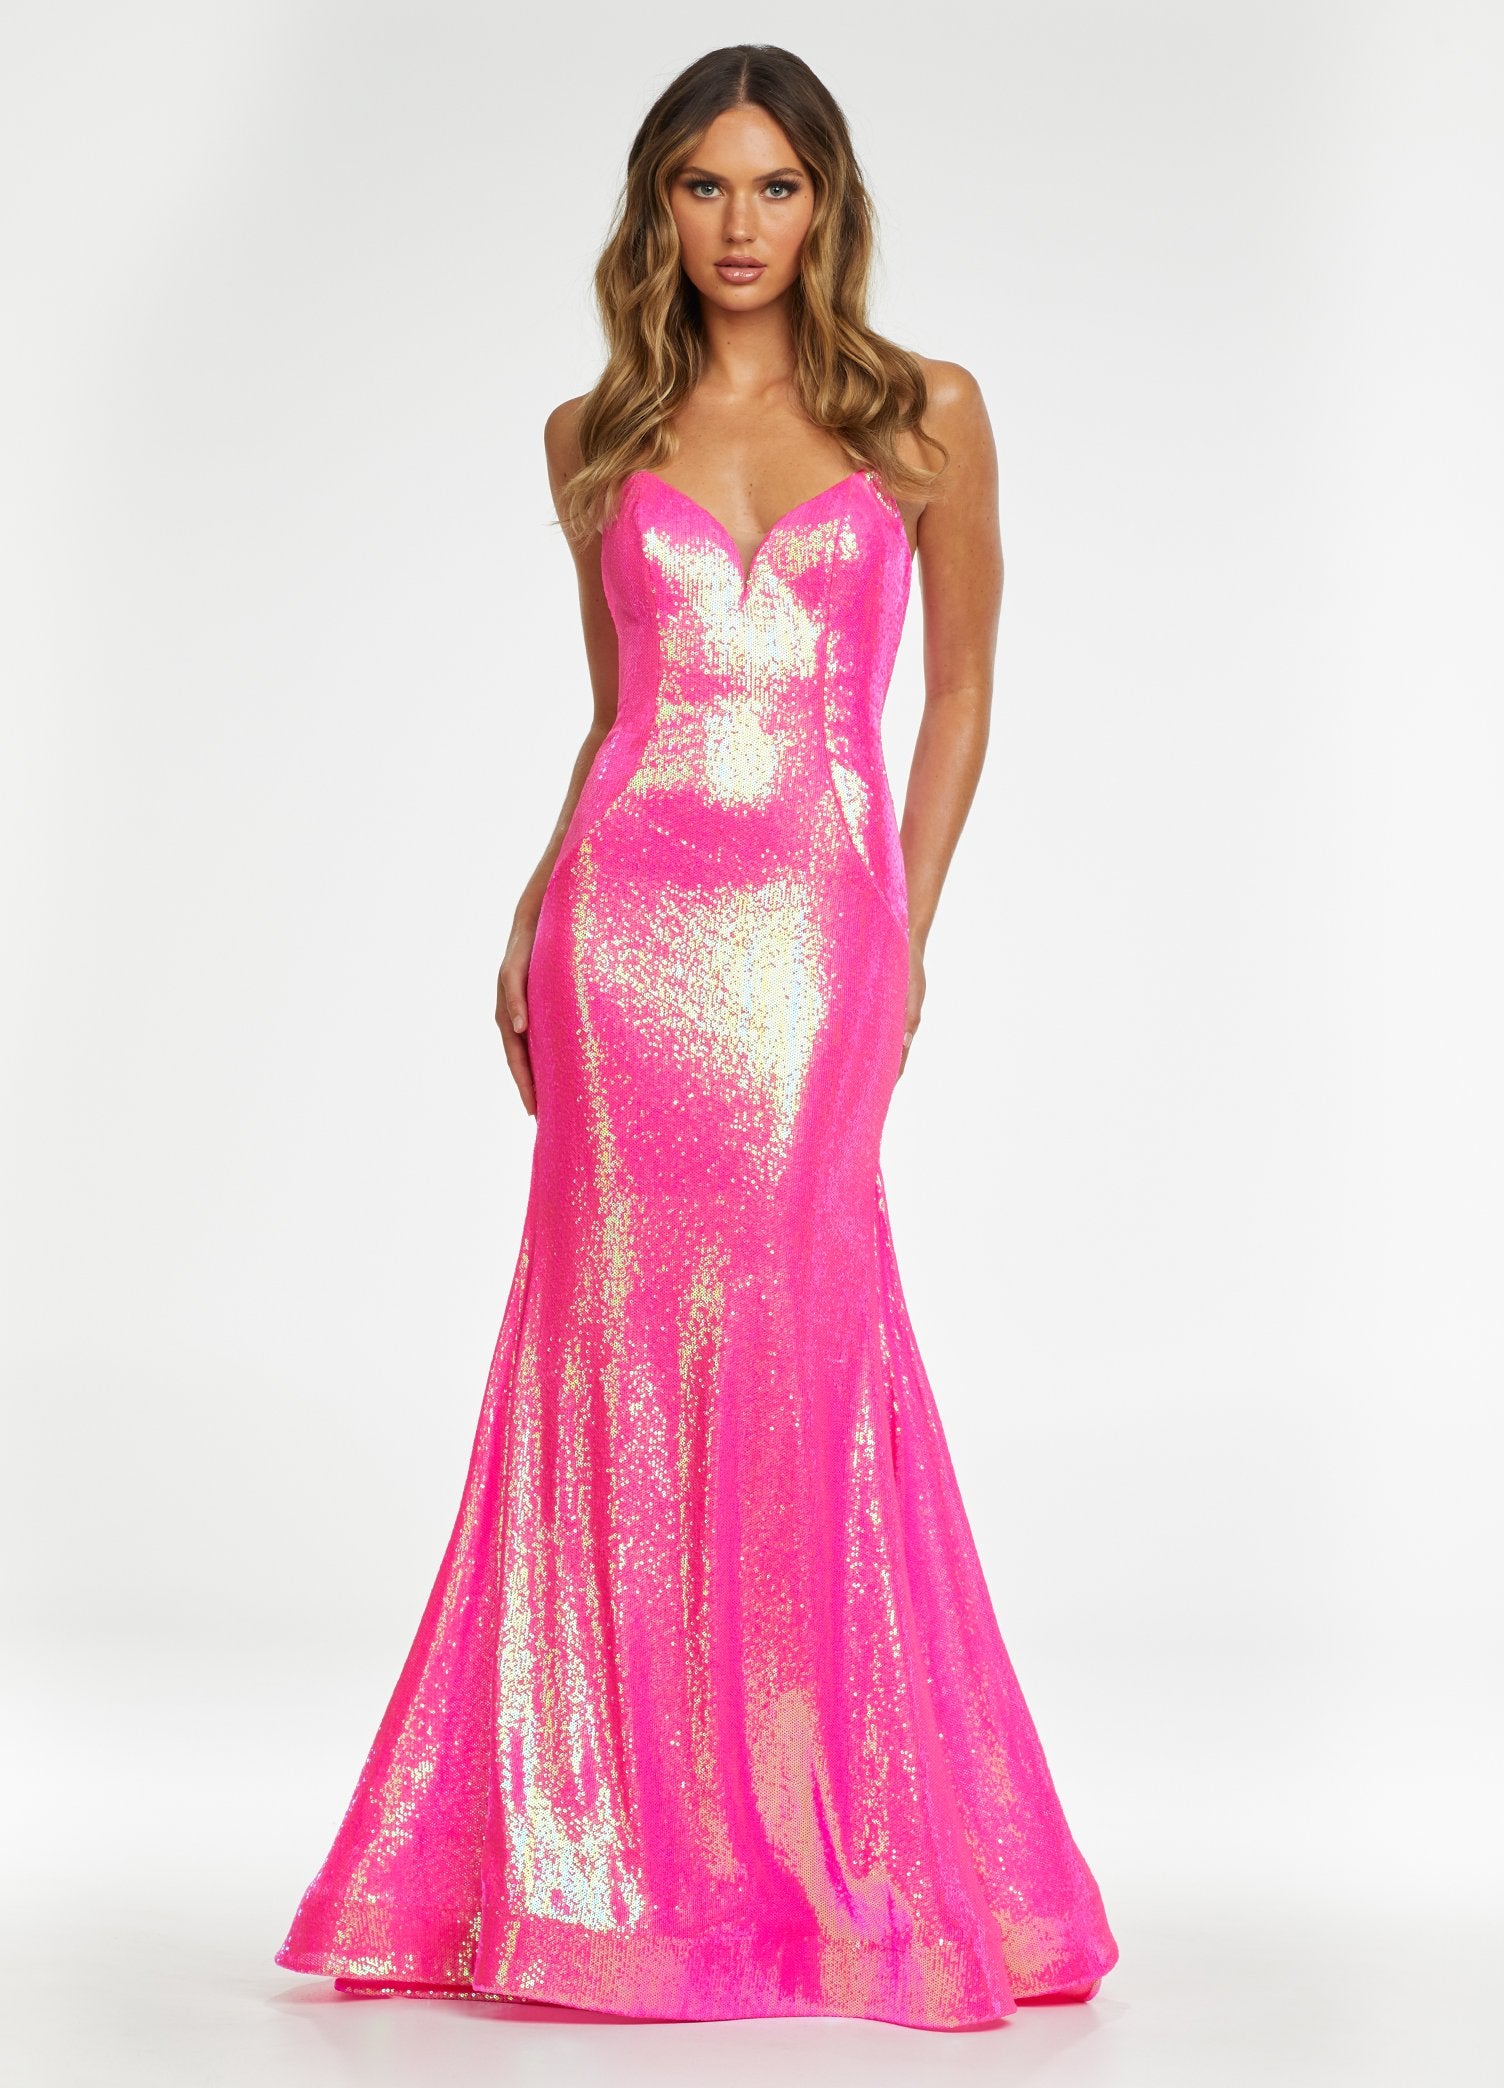 Ashley Lauren 11163 Long Fitted Sequin Strapless Prom Pageant Dress Train Peak Point This fitted strapless sequin gown with a V-Neckline is accented with contour seaming that is sure to accentuate your curves. The gown is completed with a puddle train.  Available Sizes: 00-16  Available Colors:   Neon Green, Neon Pink, Neon Blue, AB Ivory Stapless Sweetheart Neckline Fitted Sequin Fabric